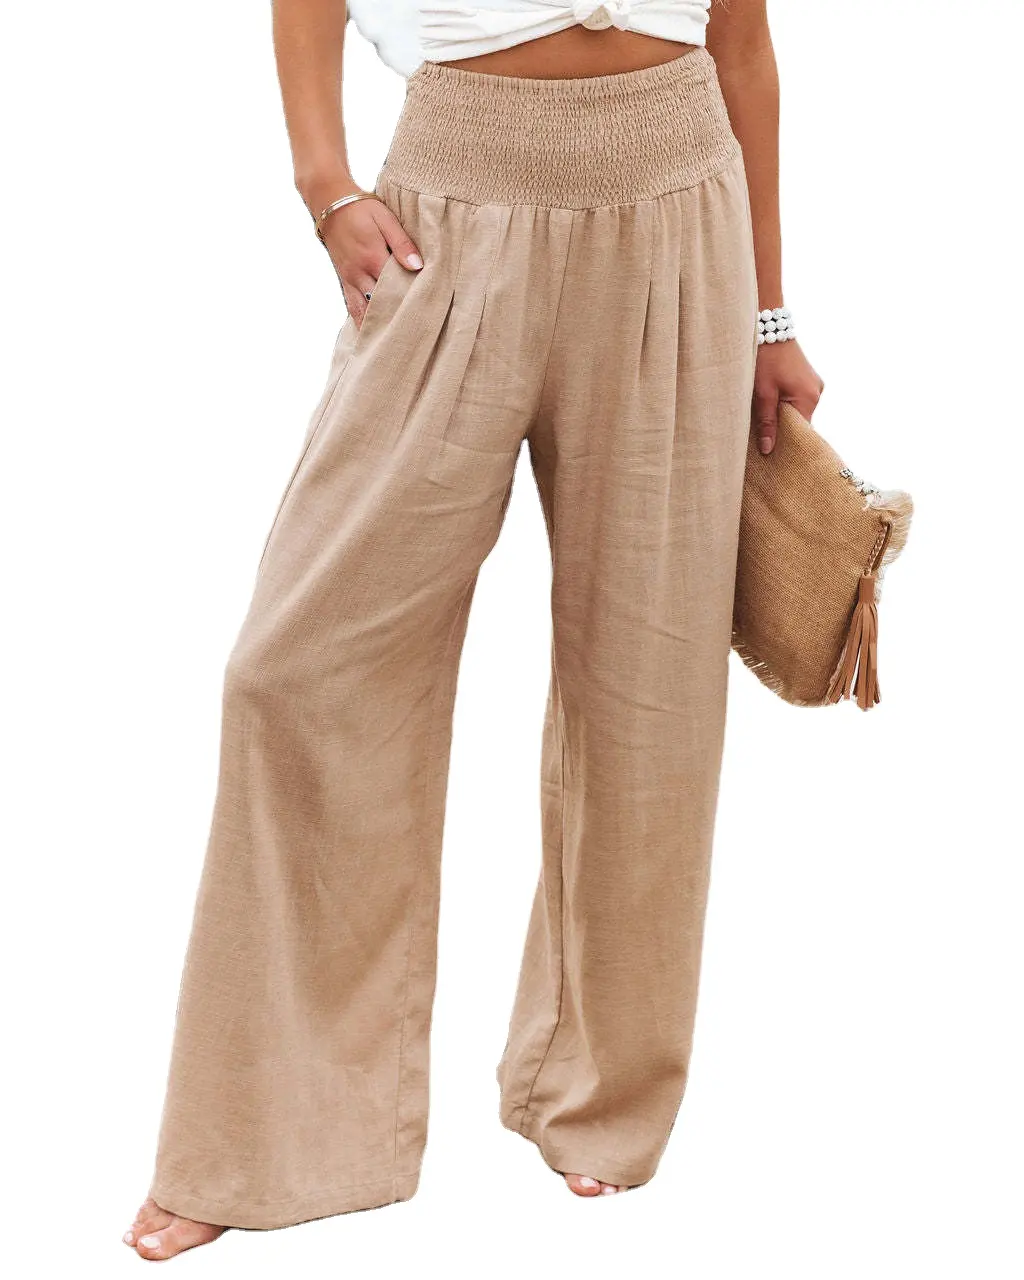 Women's Casual High Waisted Colourful Women Pants Summer Beige Formal Pants For Women Wide Leg Trousers V054-1